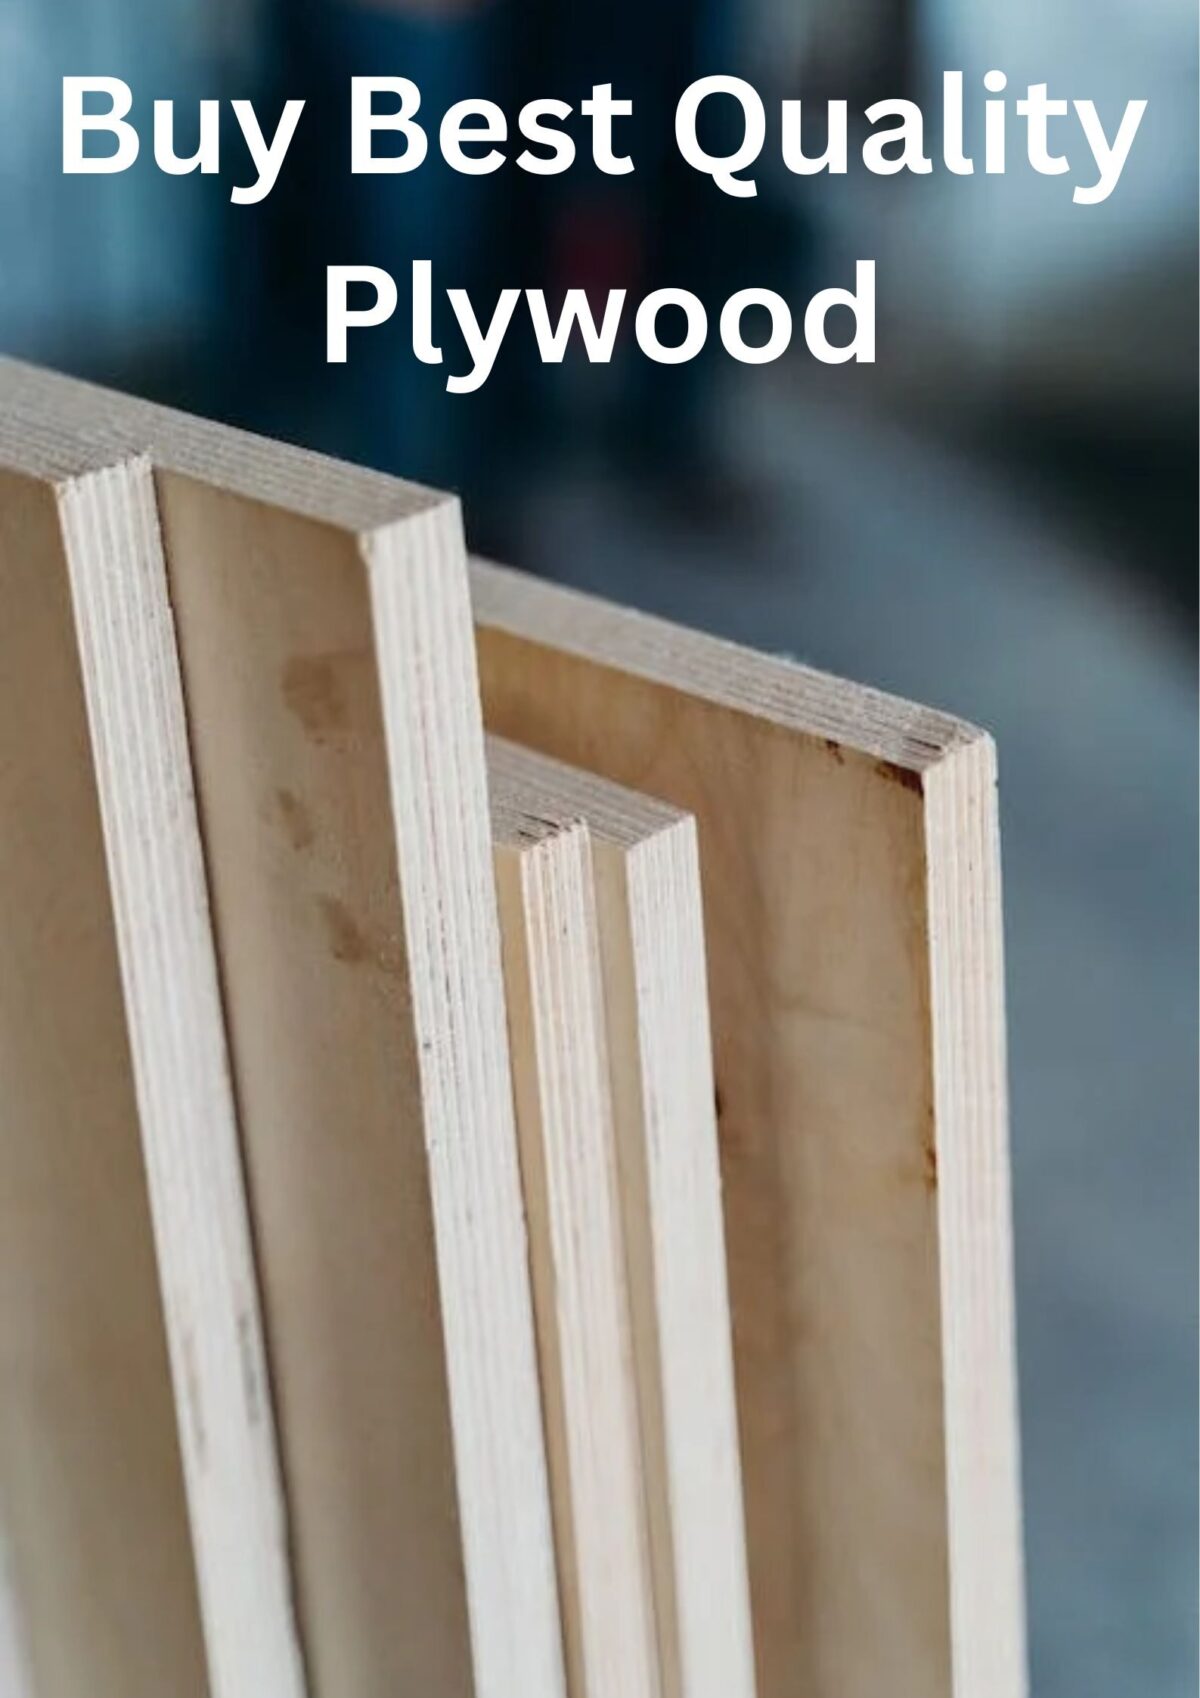 Which plywood is better for wardrobes, a 16 mm or an 18 mm?